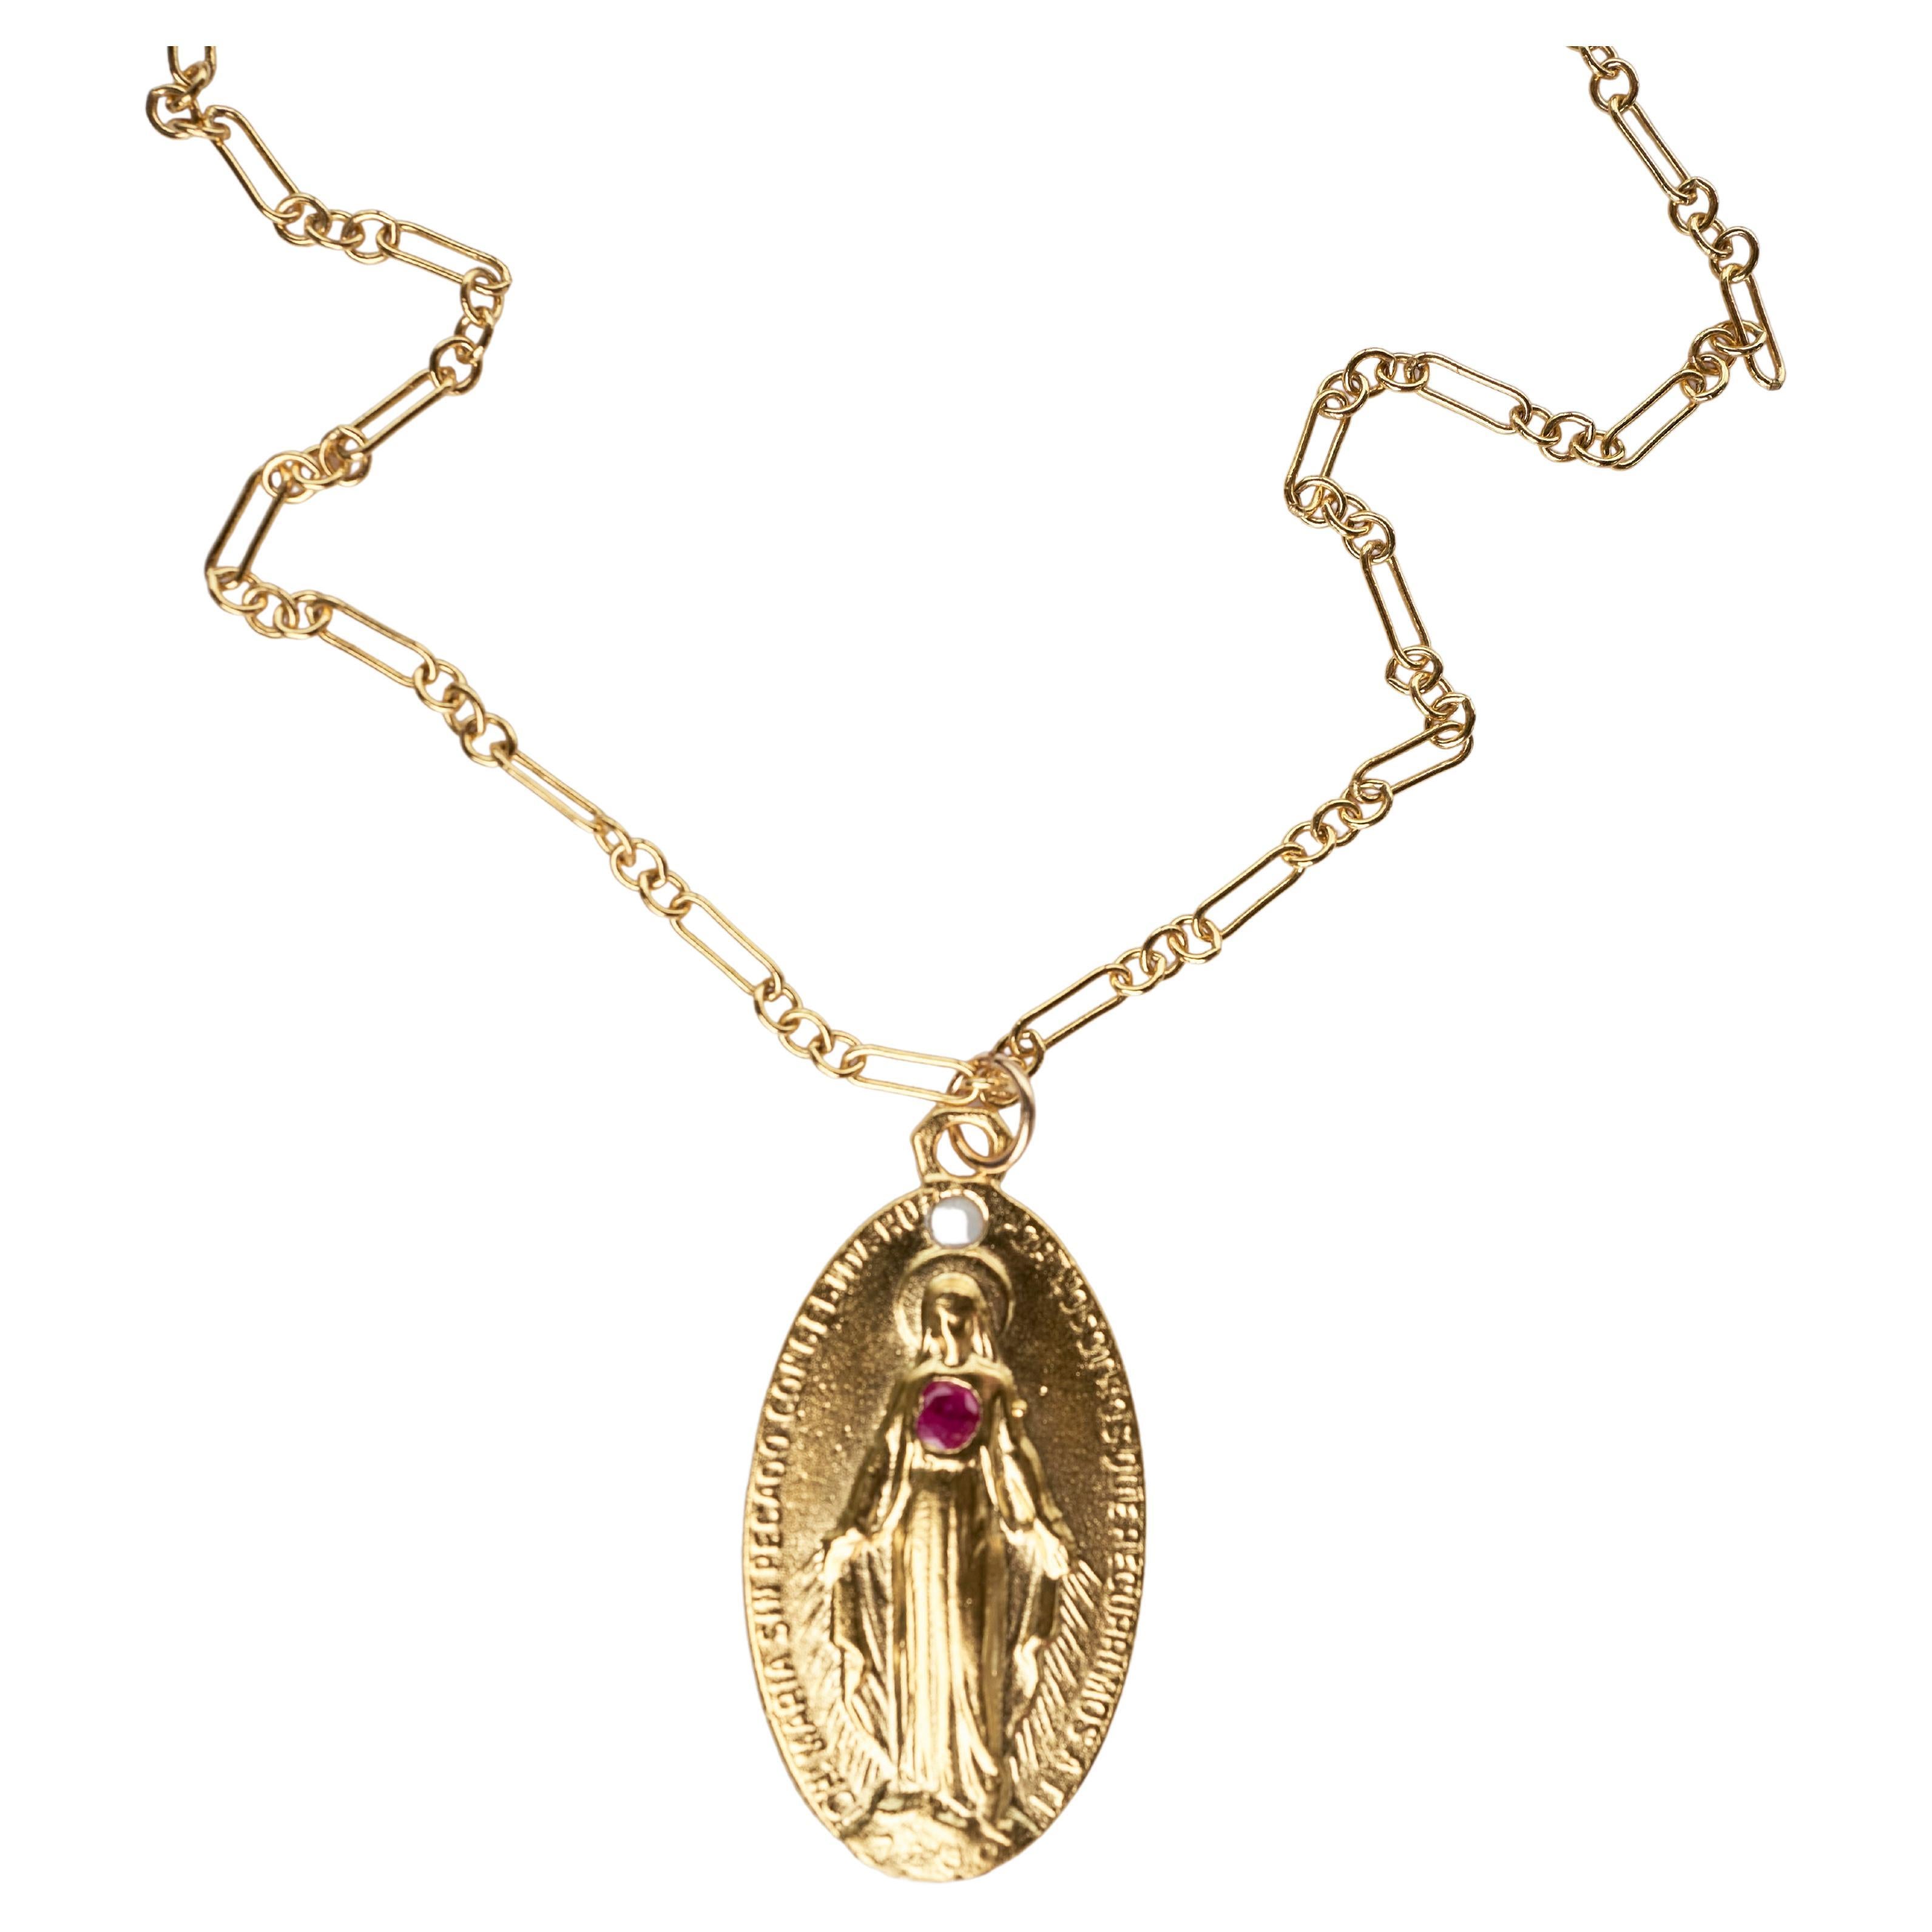 Ruby Opal Medal Virgin Mary Chain Necklace
Designer: J Dauphin
14k Gold Plated Brass Medal and Gold Filled Chain

Symbols or medals can become a powerful tool in our arsenal for the spiritual. 
Since ancient times spiritual pendants, religious